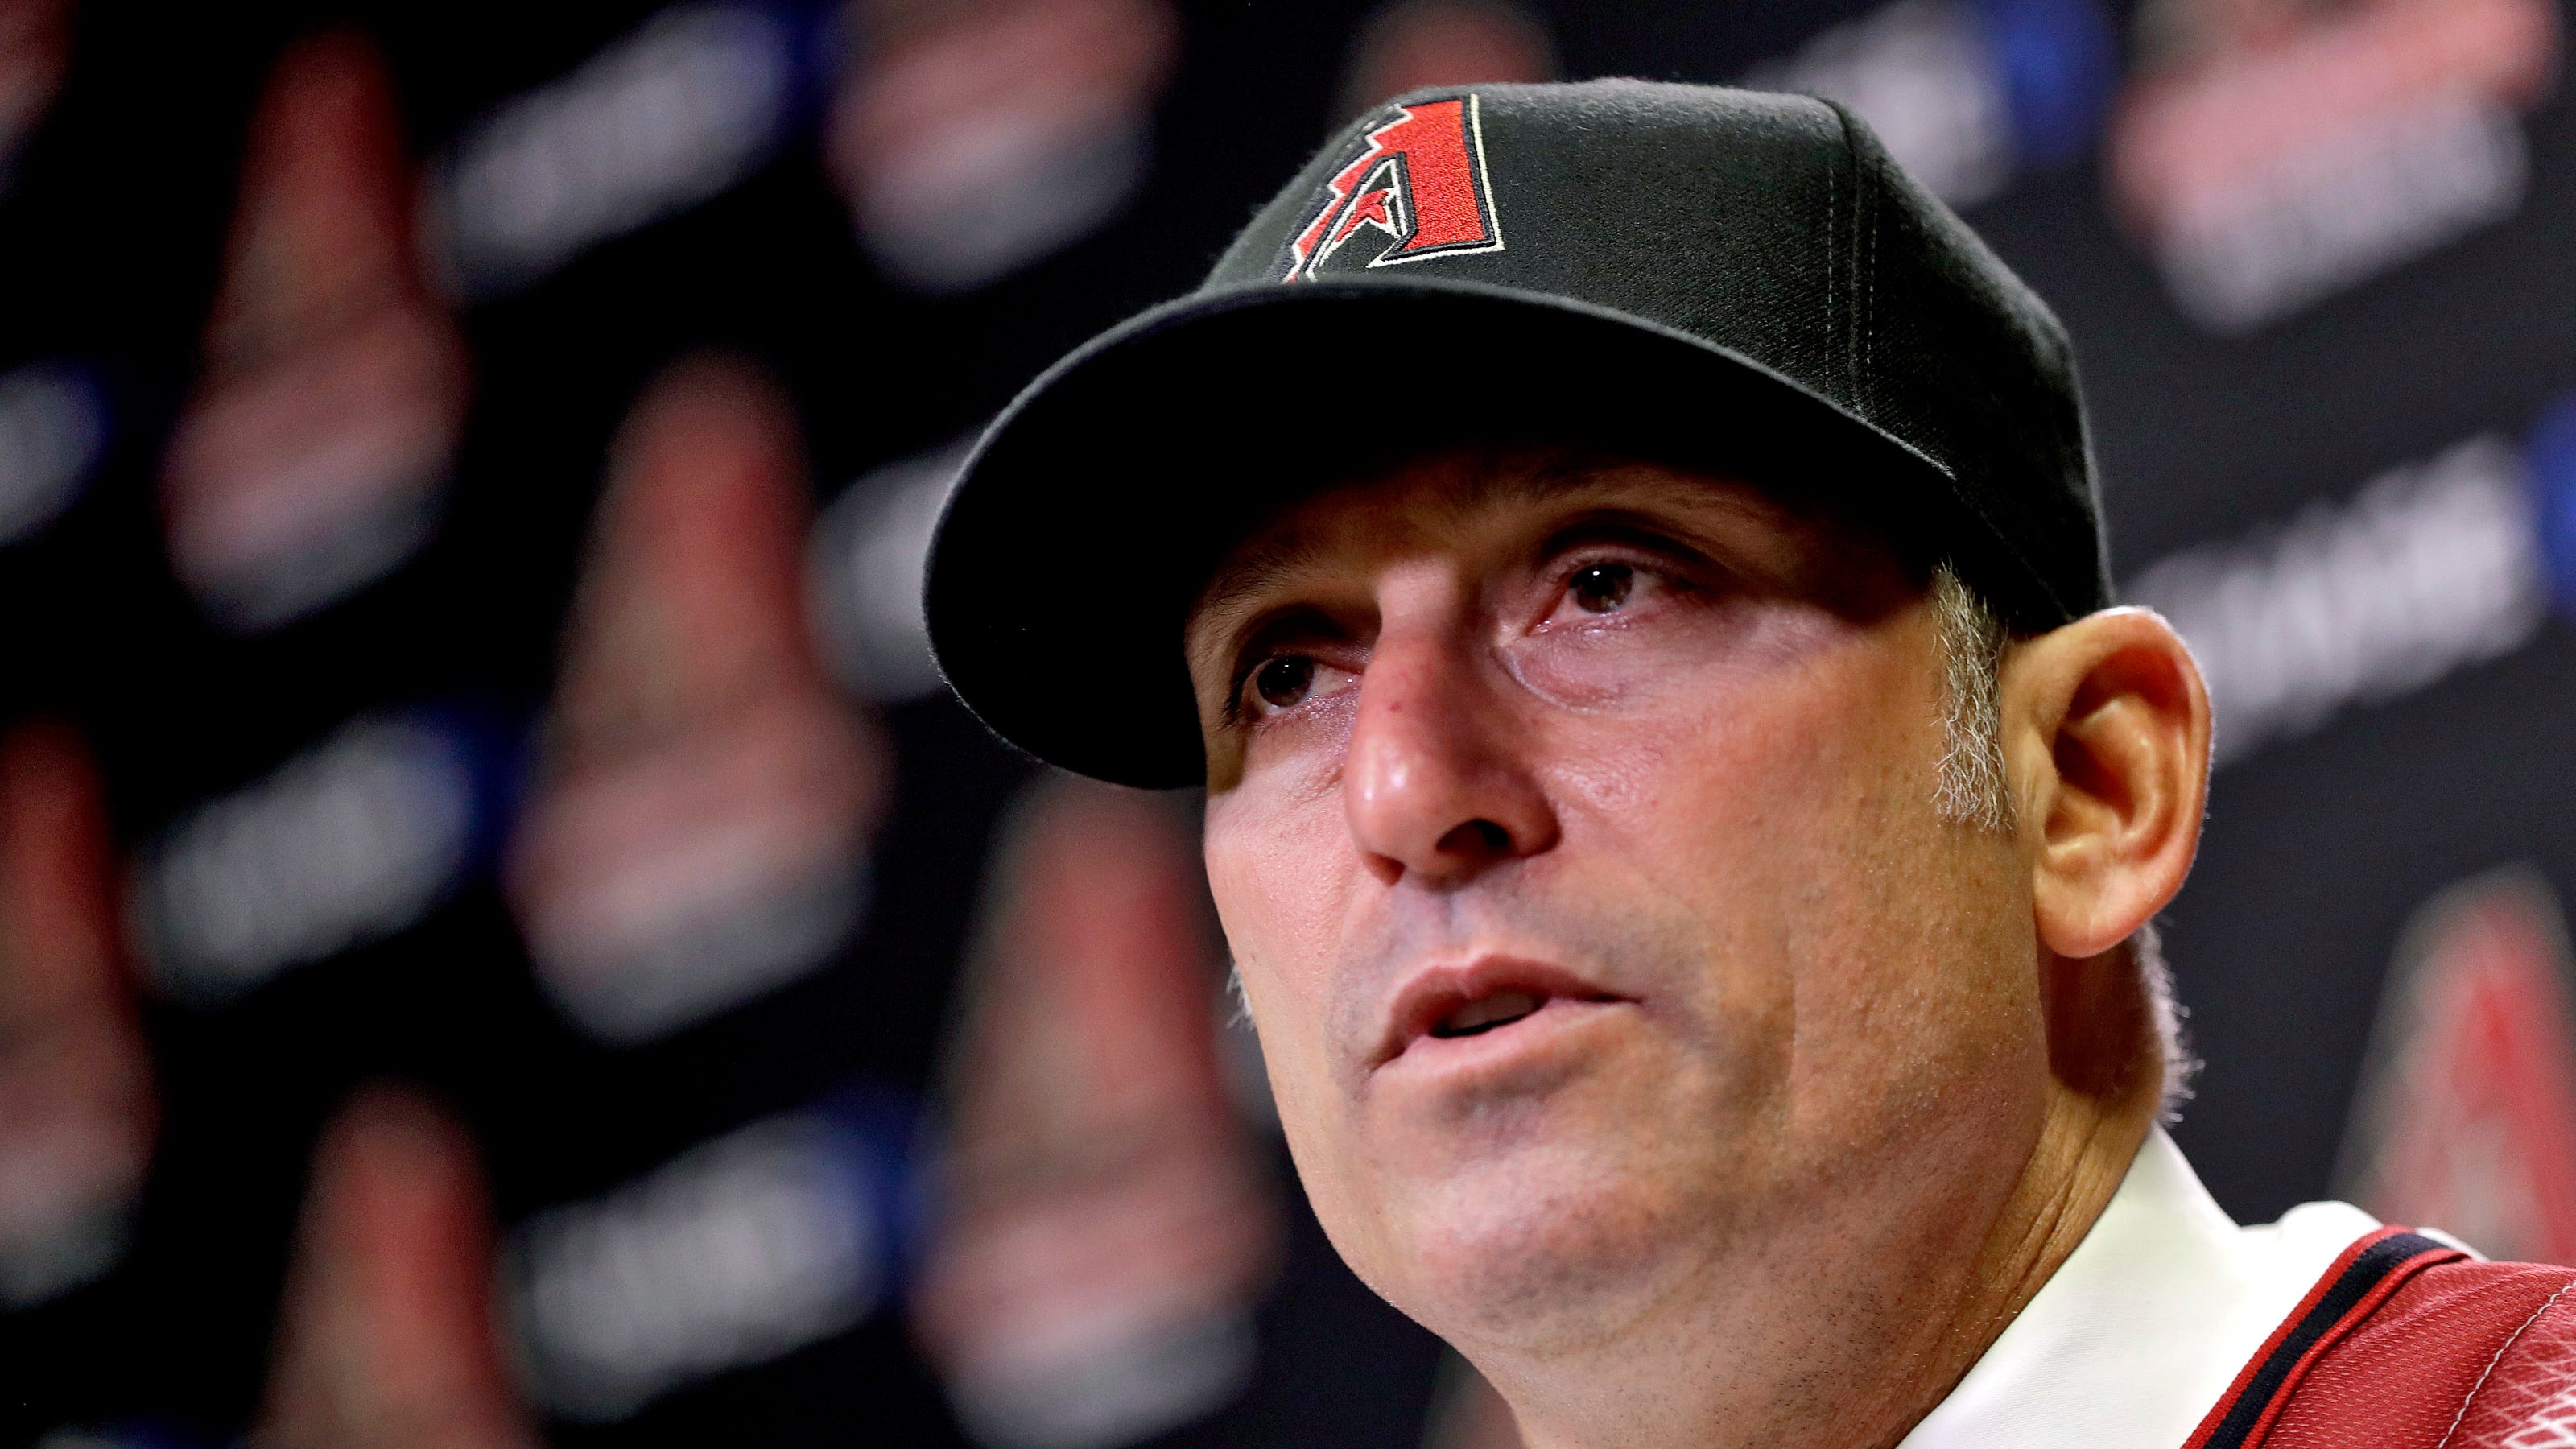 New manager says Dbacks have 'nucleus of great players'